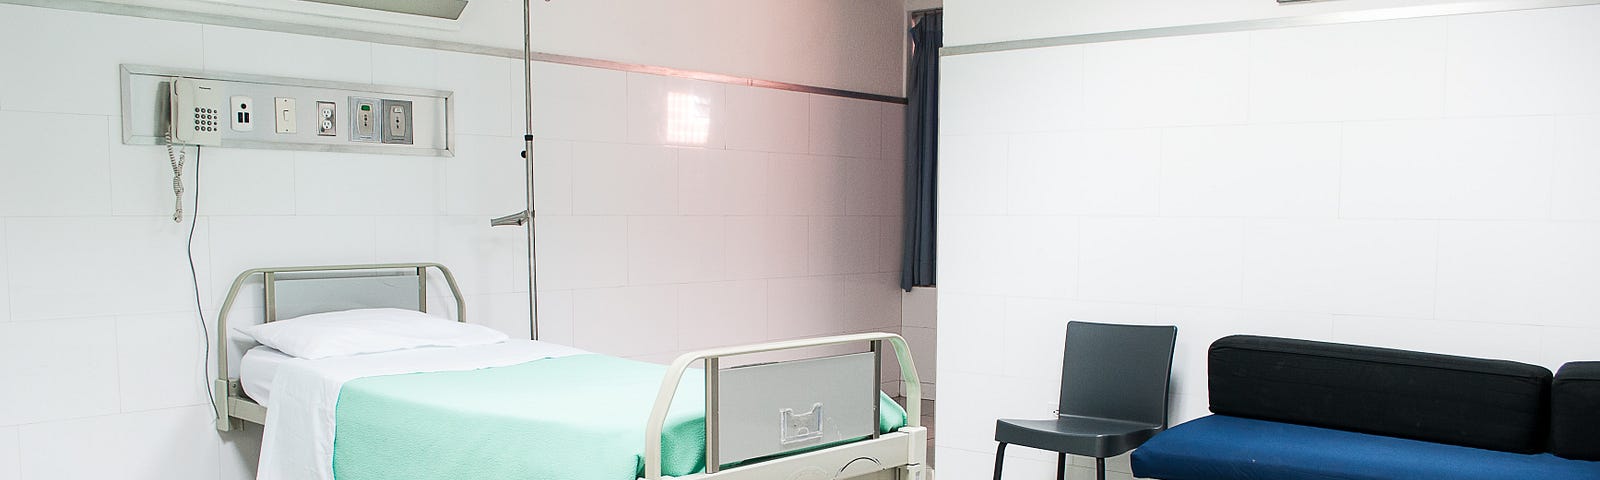 A stark white hospital room with a bed and bench.